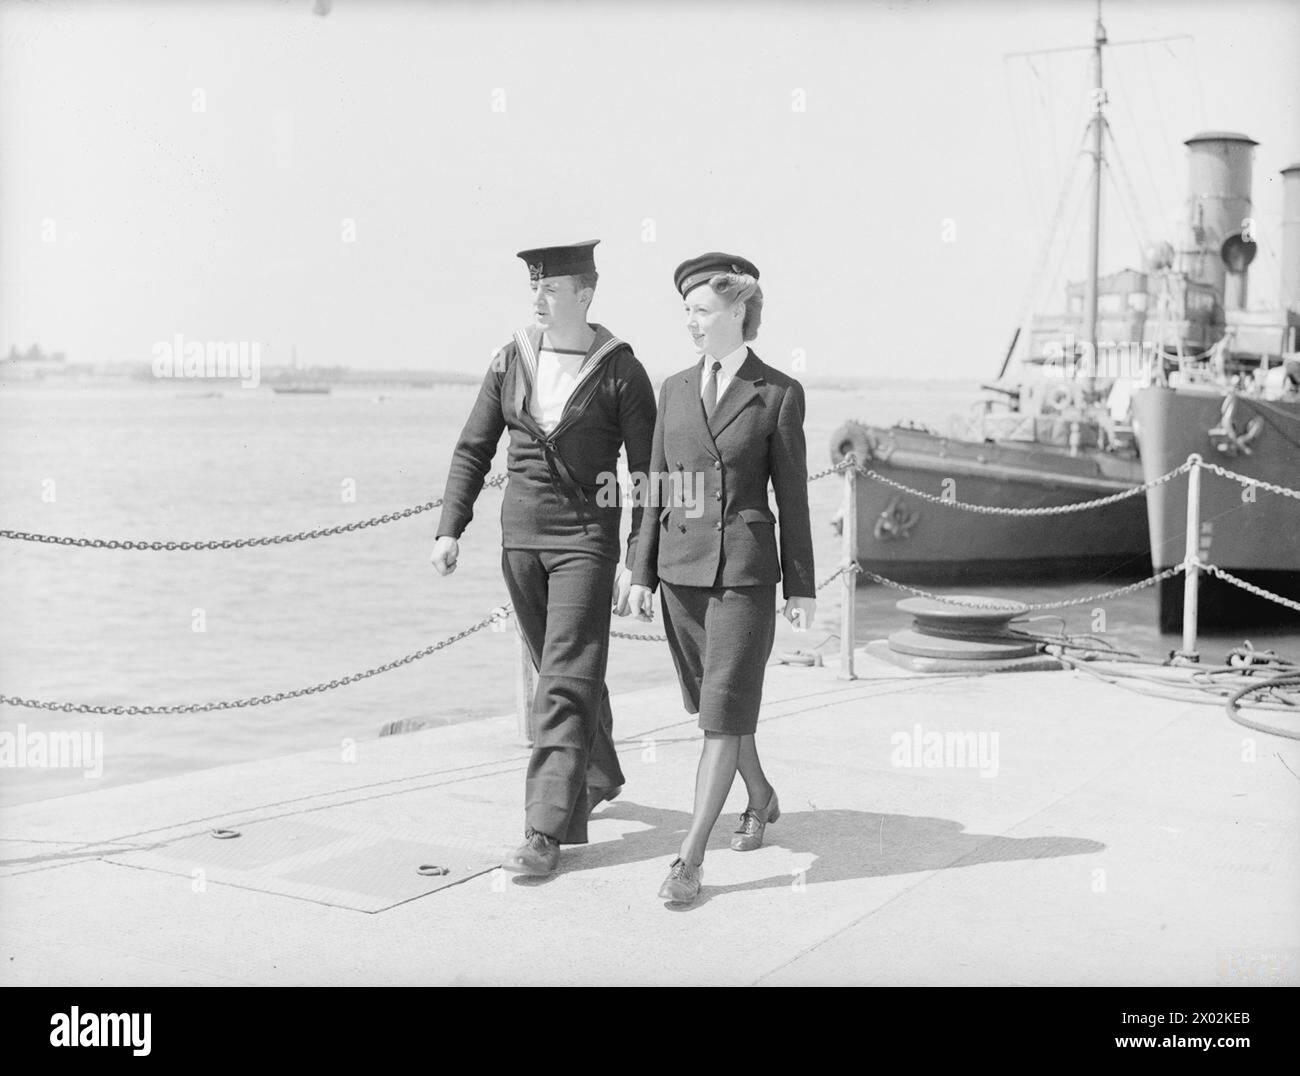 A WREN AND A RATING. 30 JULY 1943, PORTSMOUTH. - A rating of the Senior Service with a Wren rating of the sister service, the WRNS. Uniforms of both services are of navy serge Stock Photo